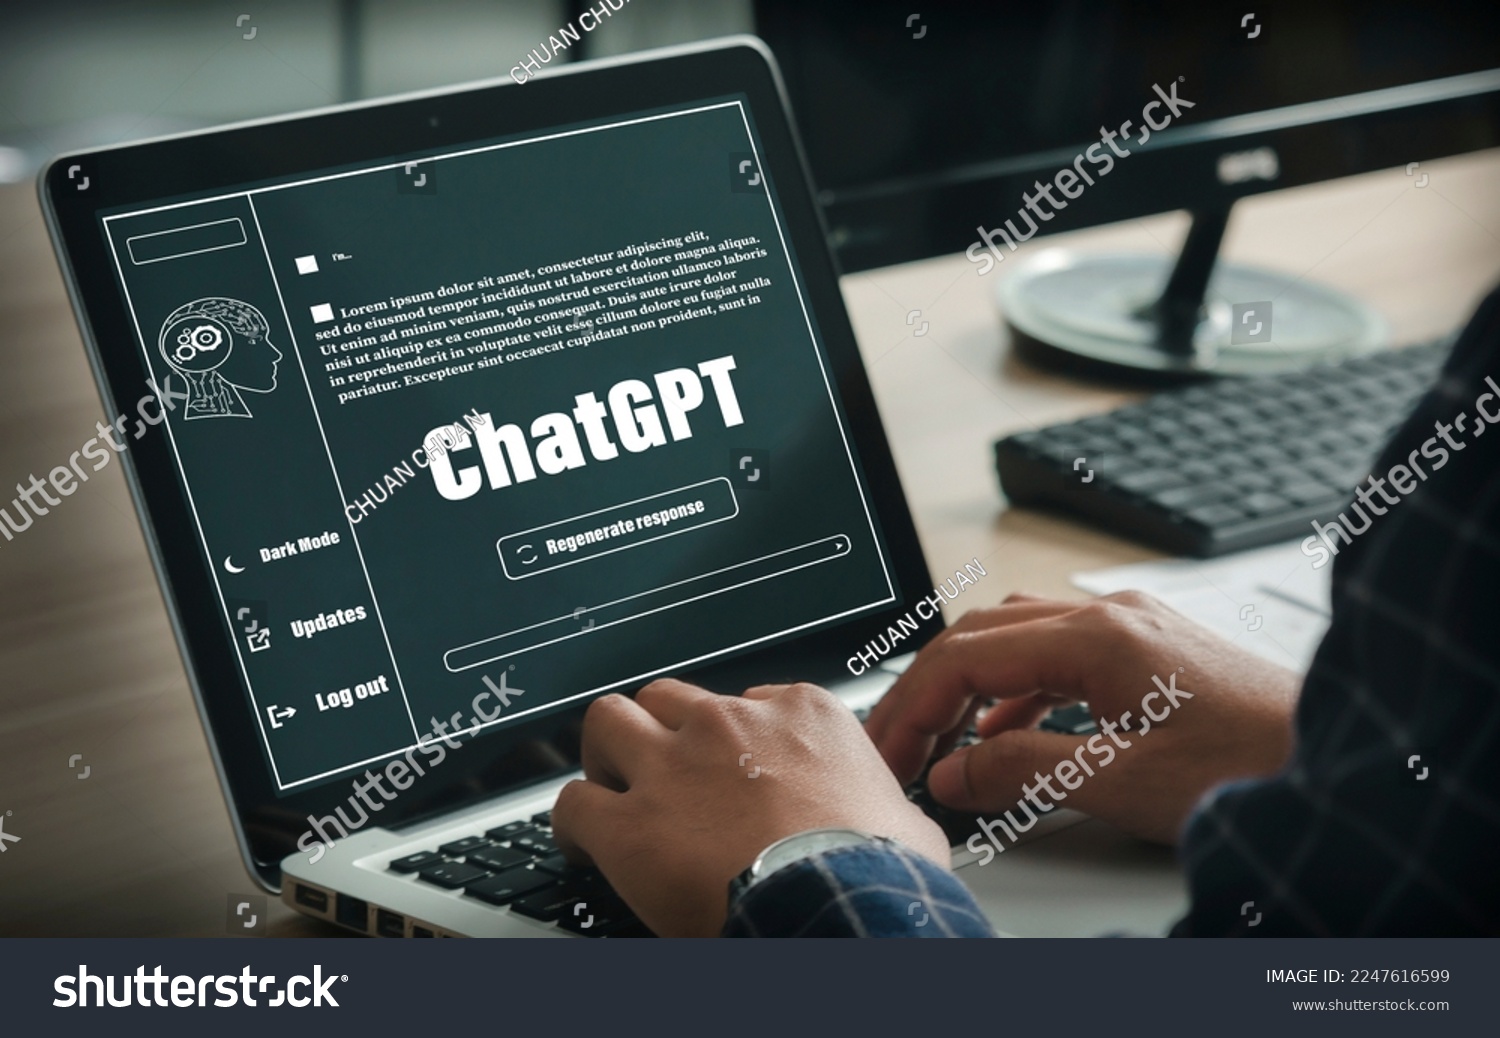 ChatGPT Chat with AI or Artificial Intelligence. Young businessman chatting with a smart AI or artificial intelligence using an artificial intelligence chatbot developed by OpenAI. #2247616599